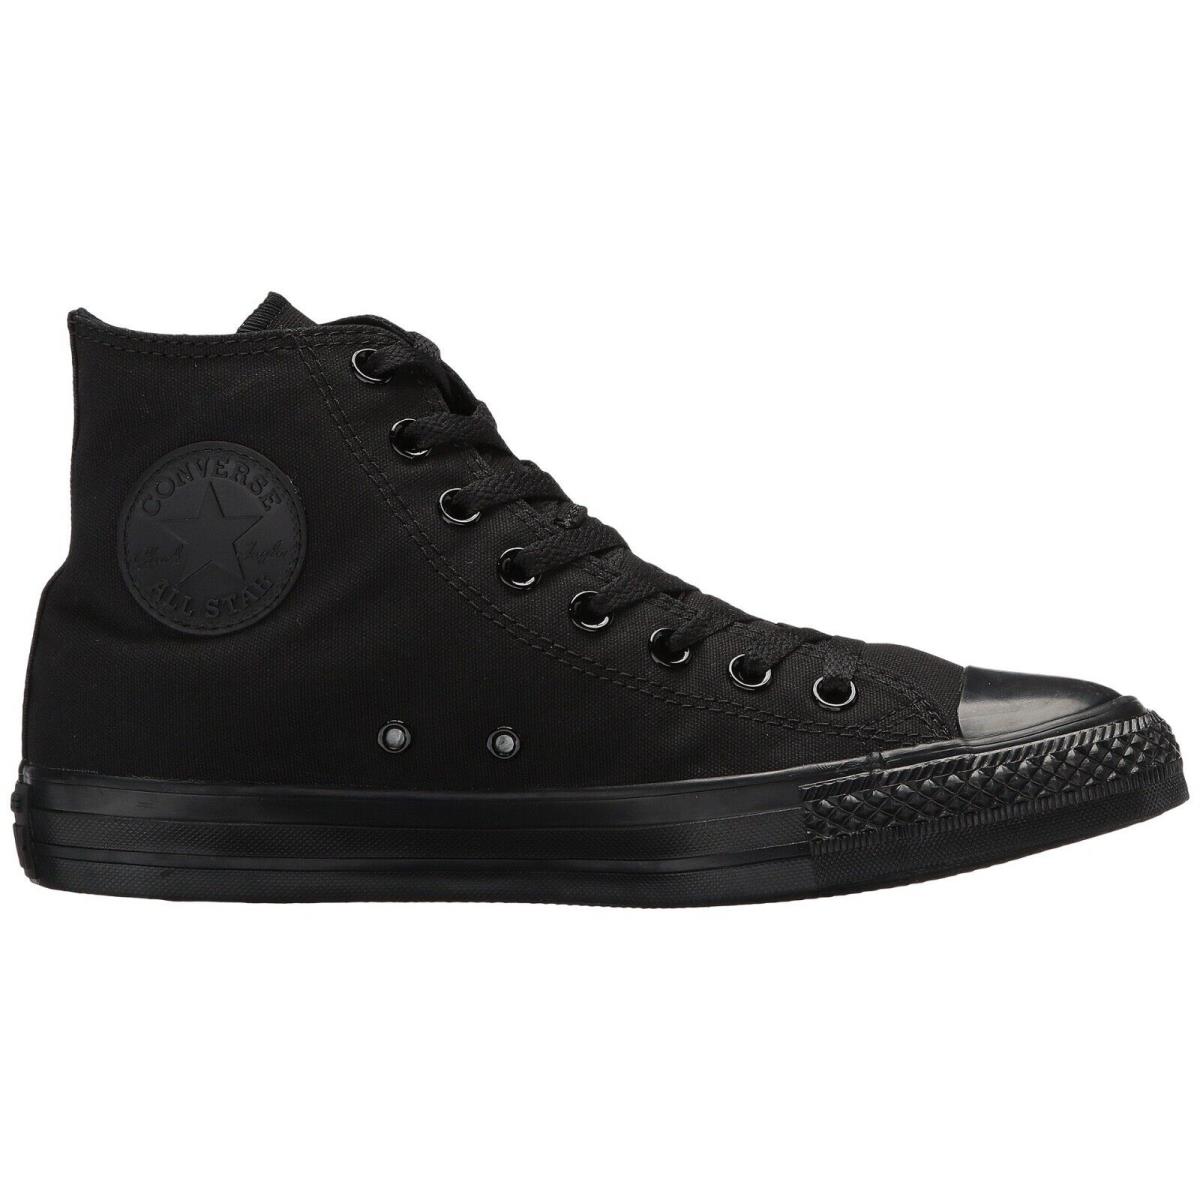 Converse Chuck Taylor All Star High Top Unisex Canvas Sneaker Classic Shoes Black Monochrome